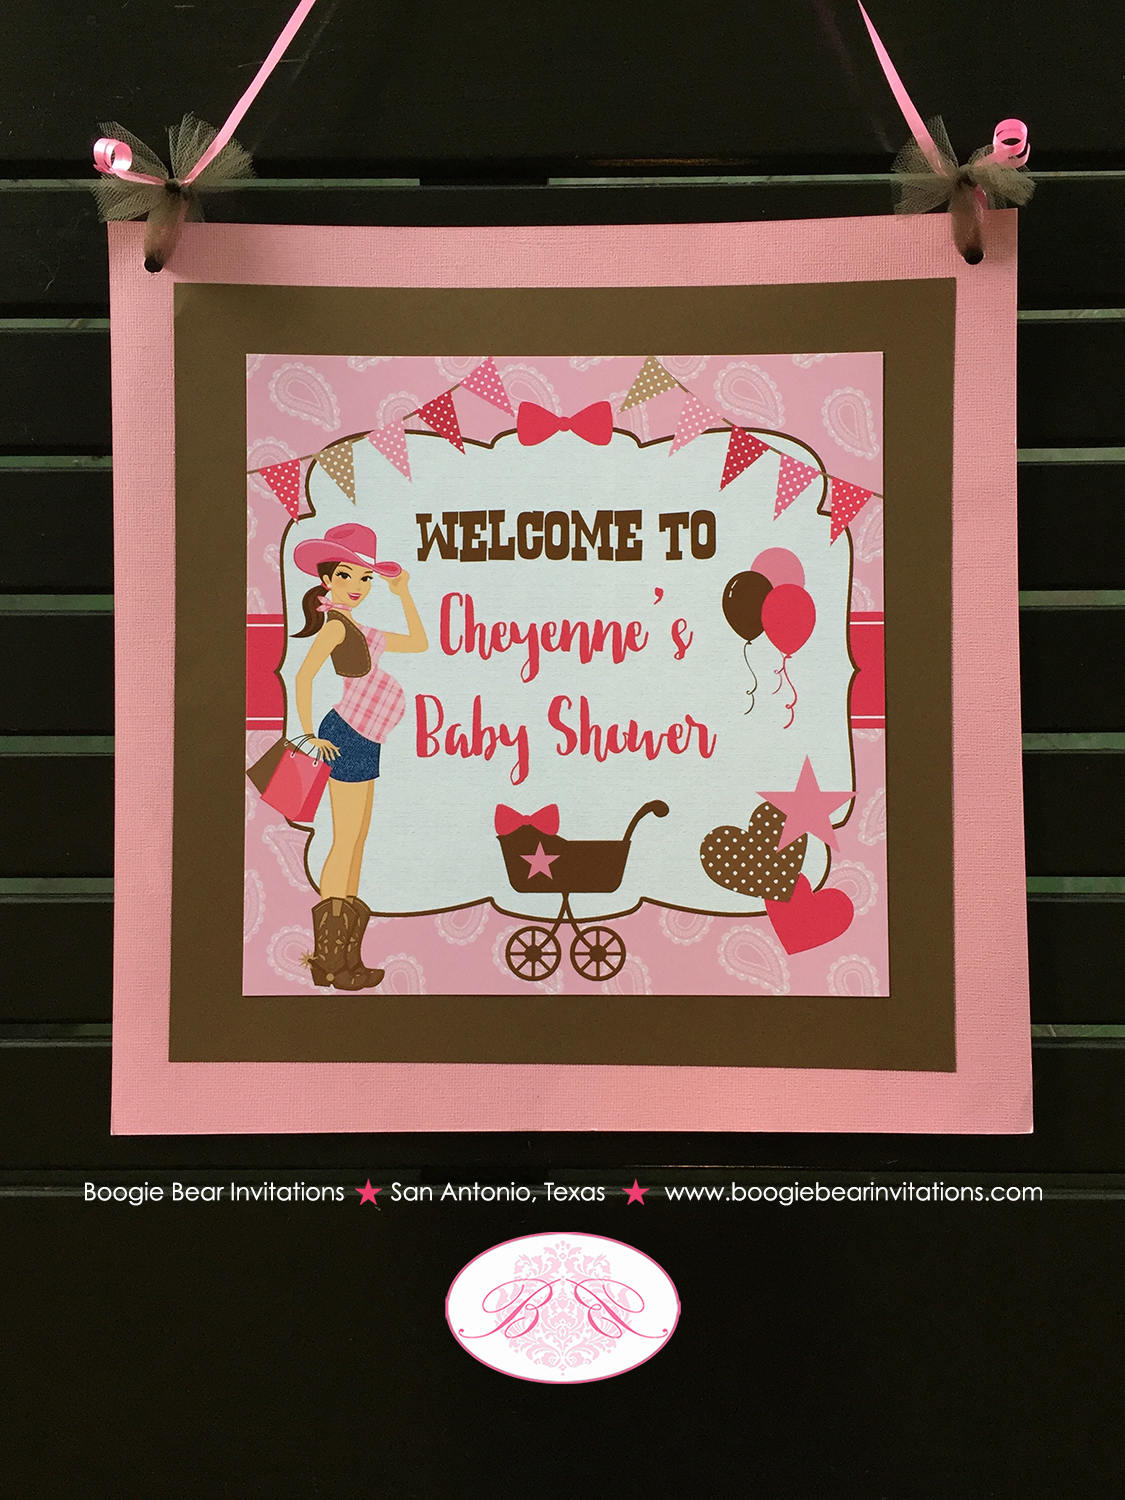 Cowgirl Pink Baby Shower Door Banner Girl Modern Chic Rustic Farm Barn Ranch Country Brown Paisley Boogie Bear Invitations Cheyenne Theme